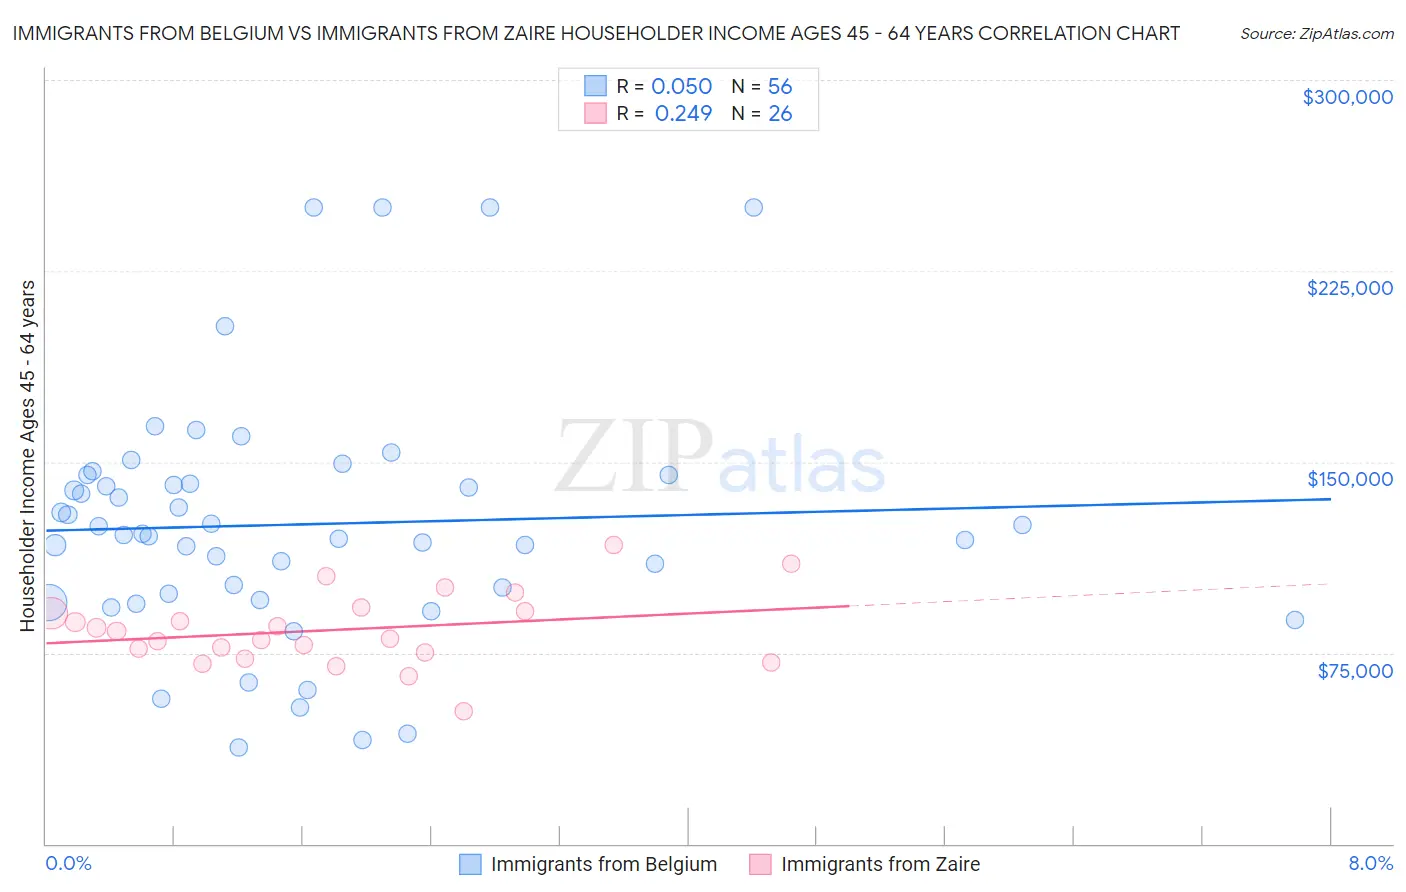 Immigrants from Belgium vs Immigrants from Zaire Householder Income Ages 45 - 64 years